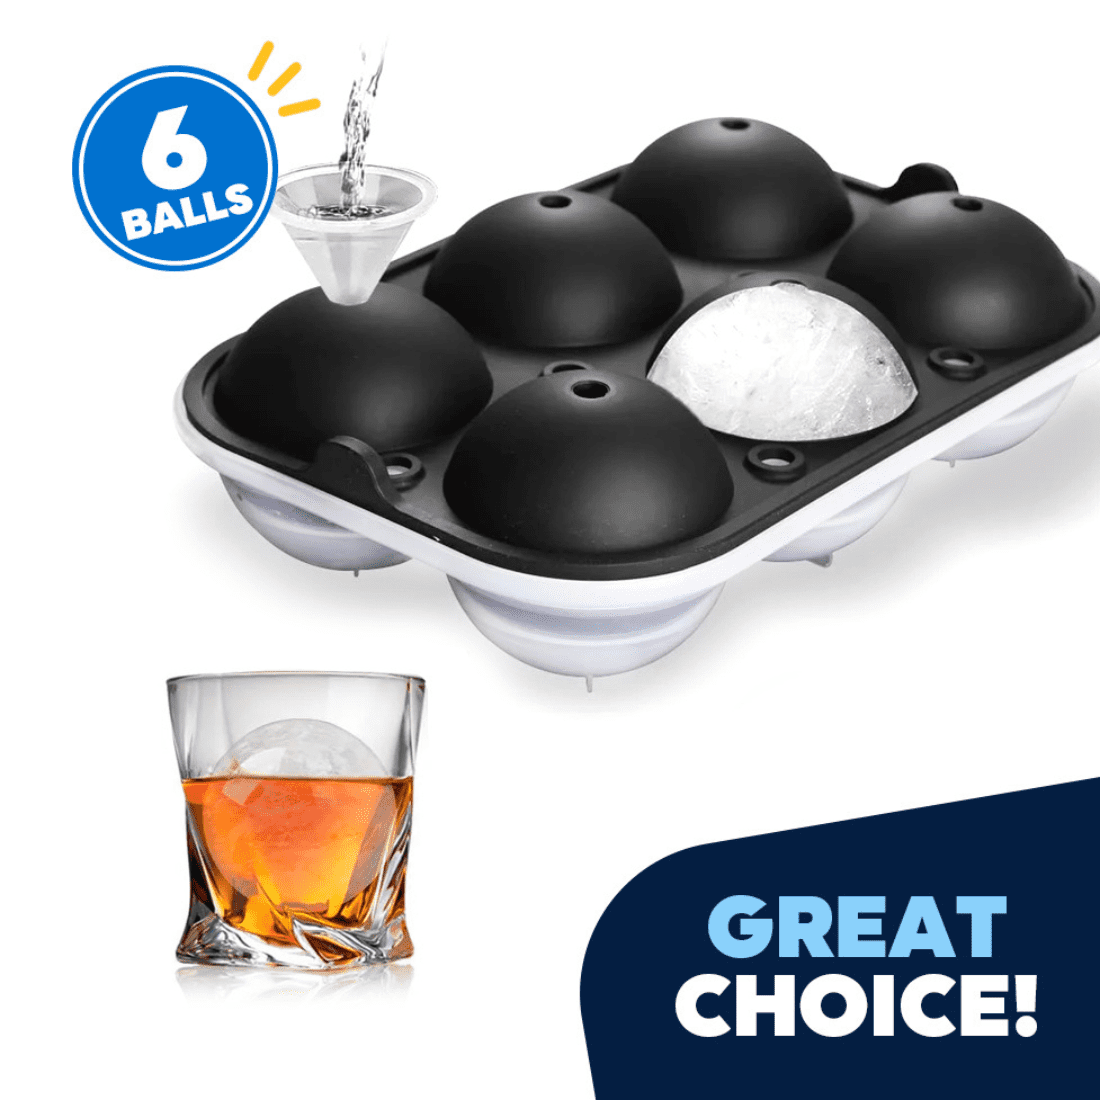 SDJMa Ice Ball Maker, Whiskey Ice Mold, Easy-Release & Flexible Silicone  Ice Cube Tray,Sphere Ice Mold for Whiskey and Cocktails